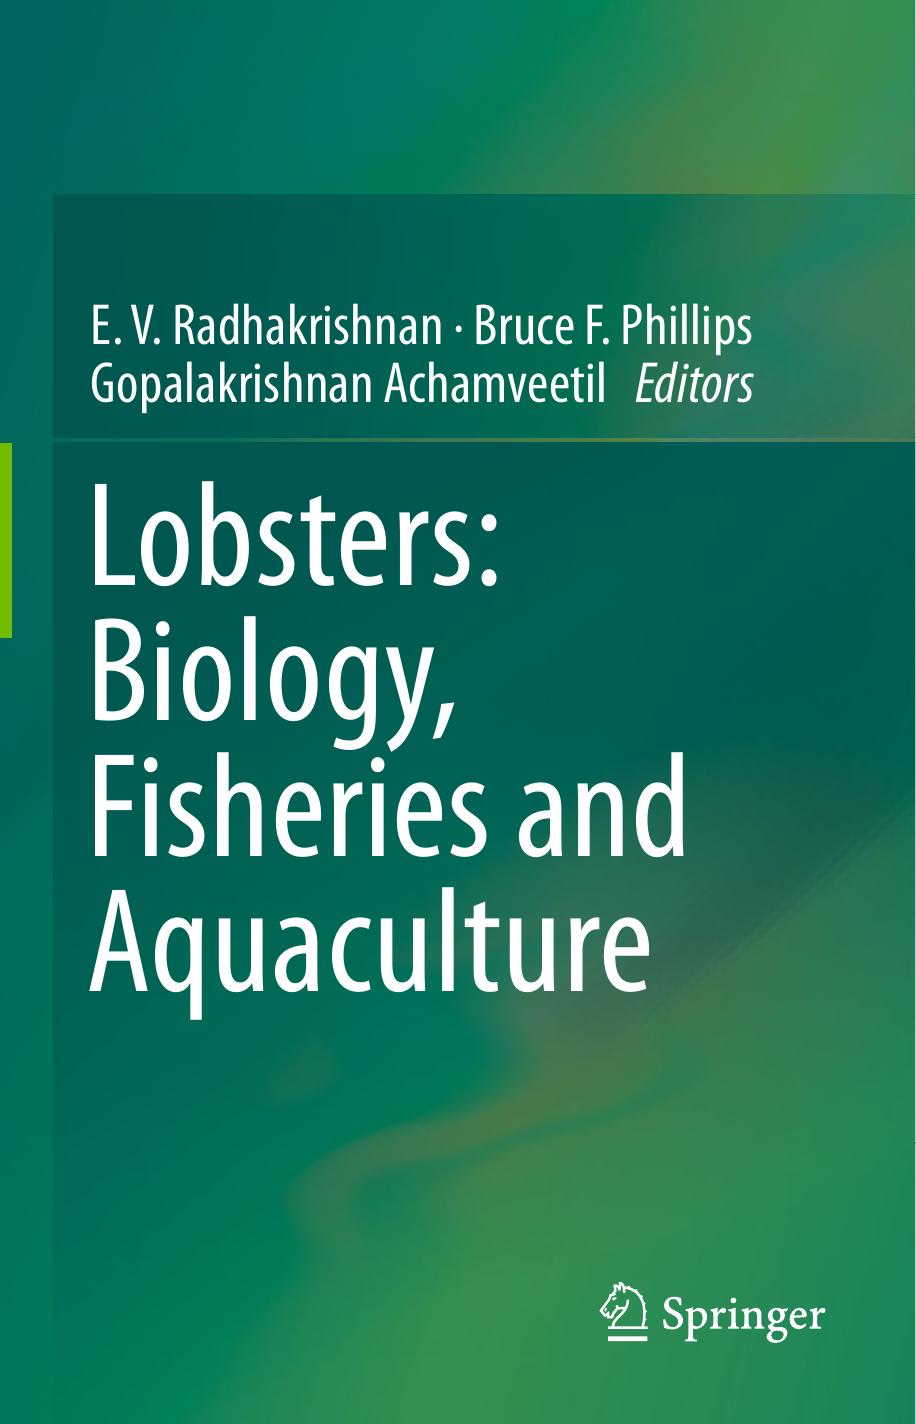 Lobsters  Biology, Fisheries and Aquaculture-Springer Singapore (2019)